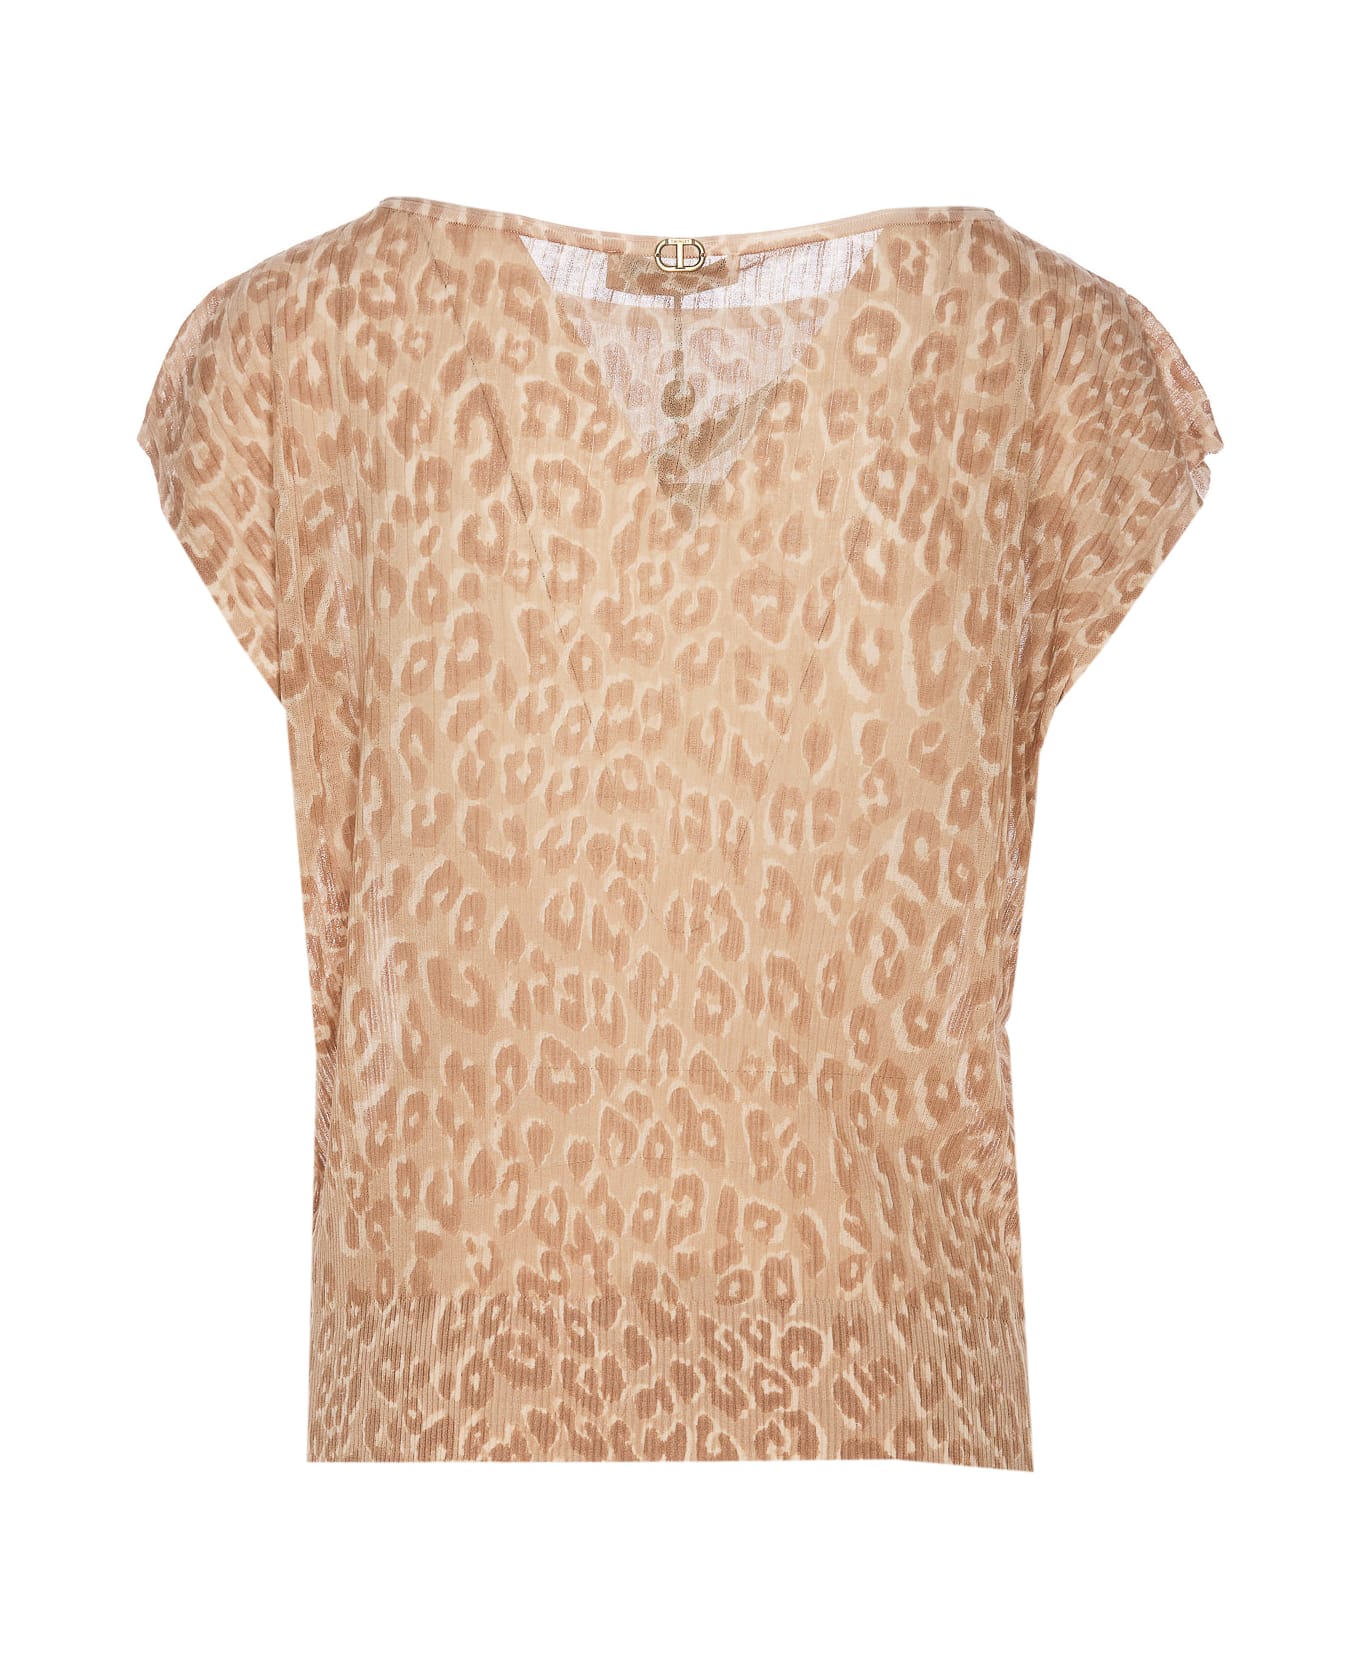 TwinSet Animalier T-shirt - Ginger Root